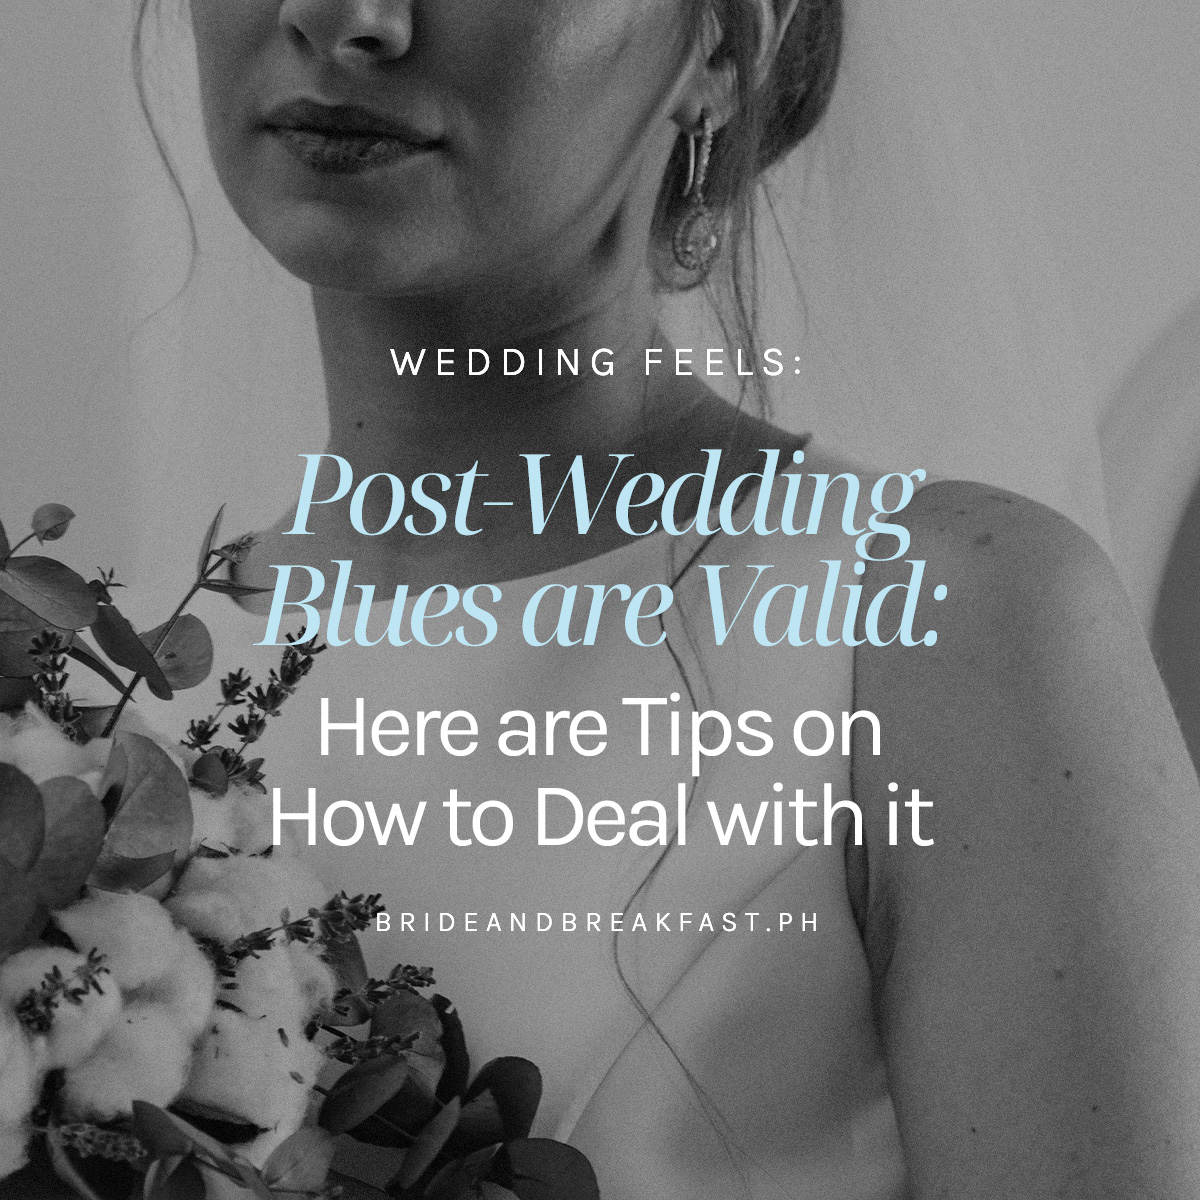 Post-Wedding Blues are Valid: Here are Tips on How to Deal with it